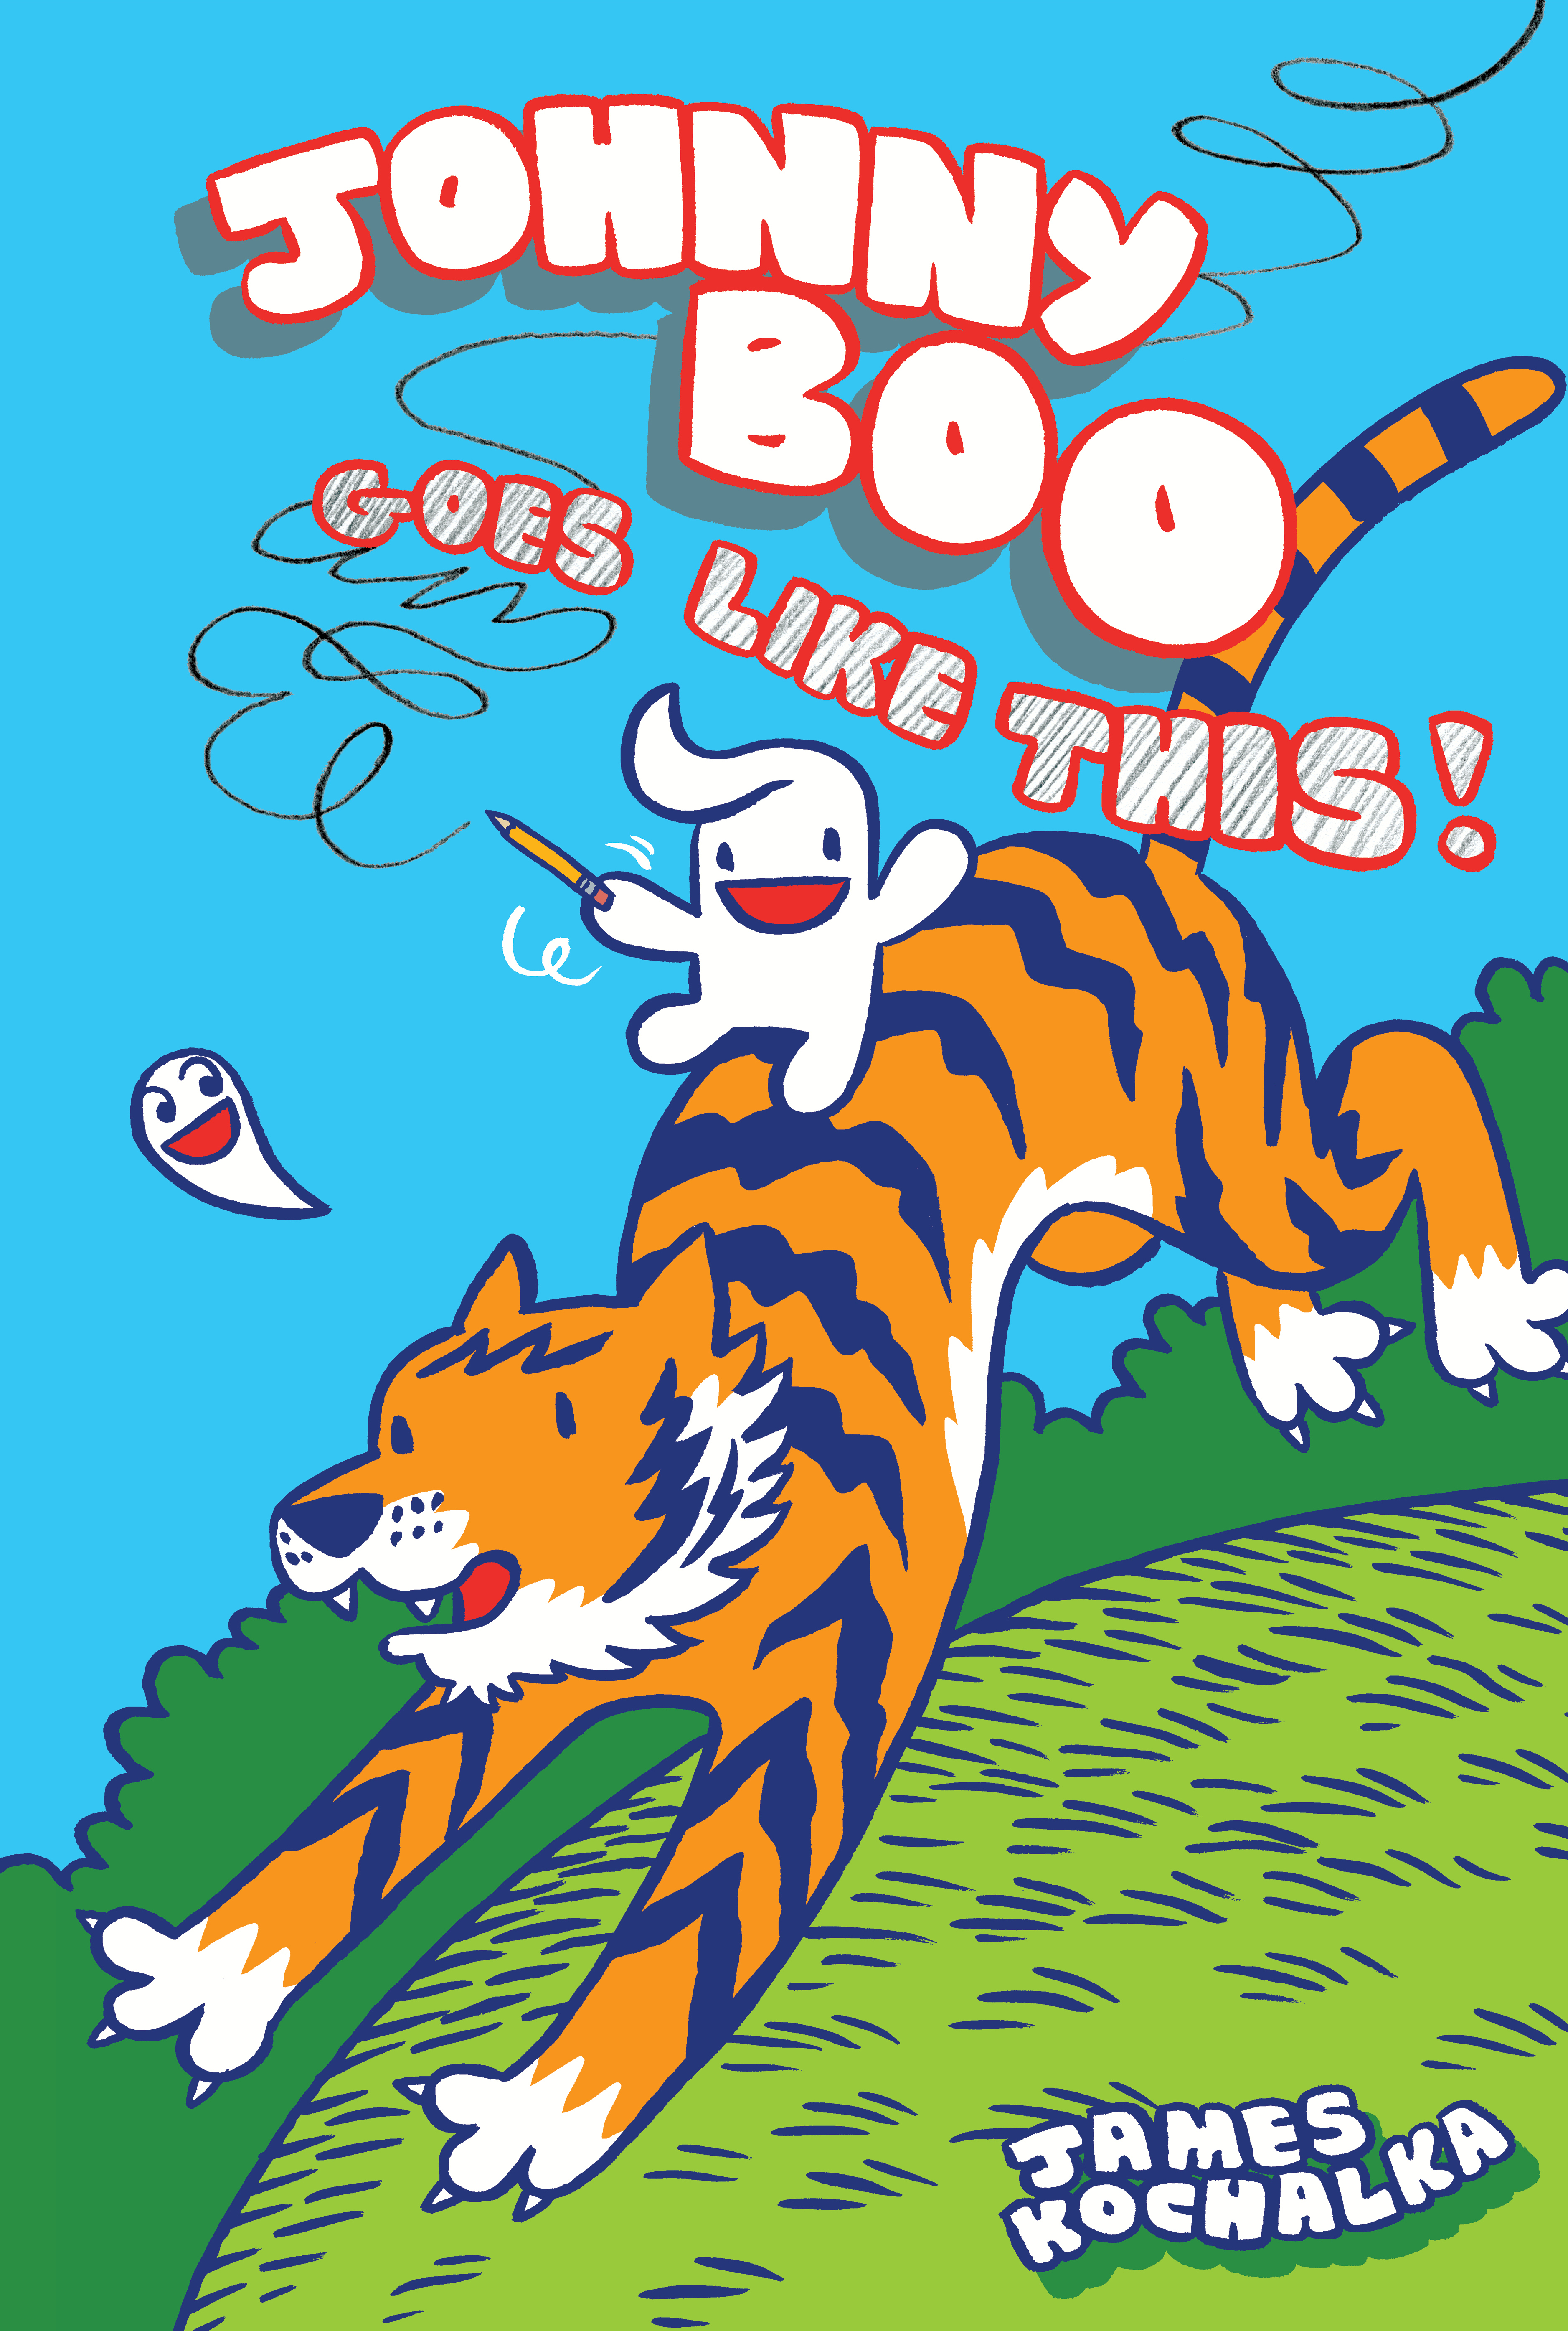 Johnny Boo Hardcover Volume 7 Johnny Boo Goes Like This